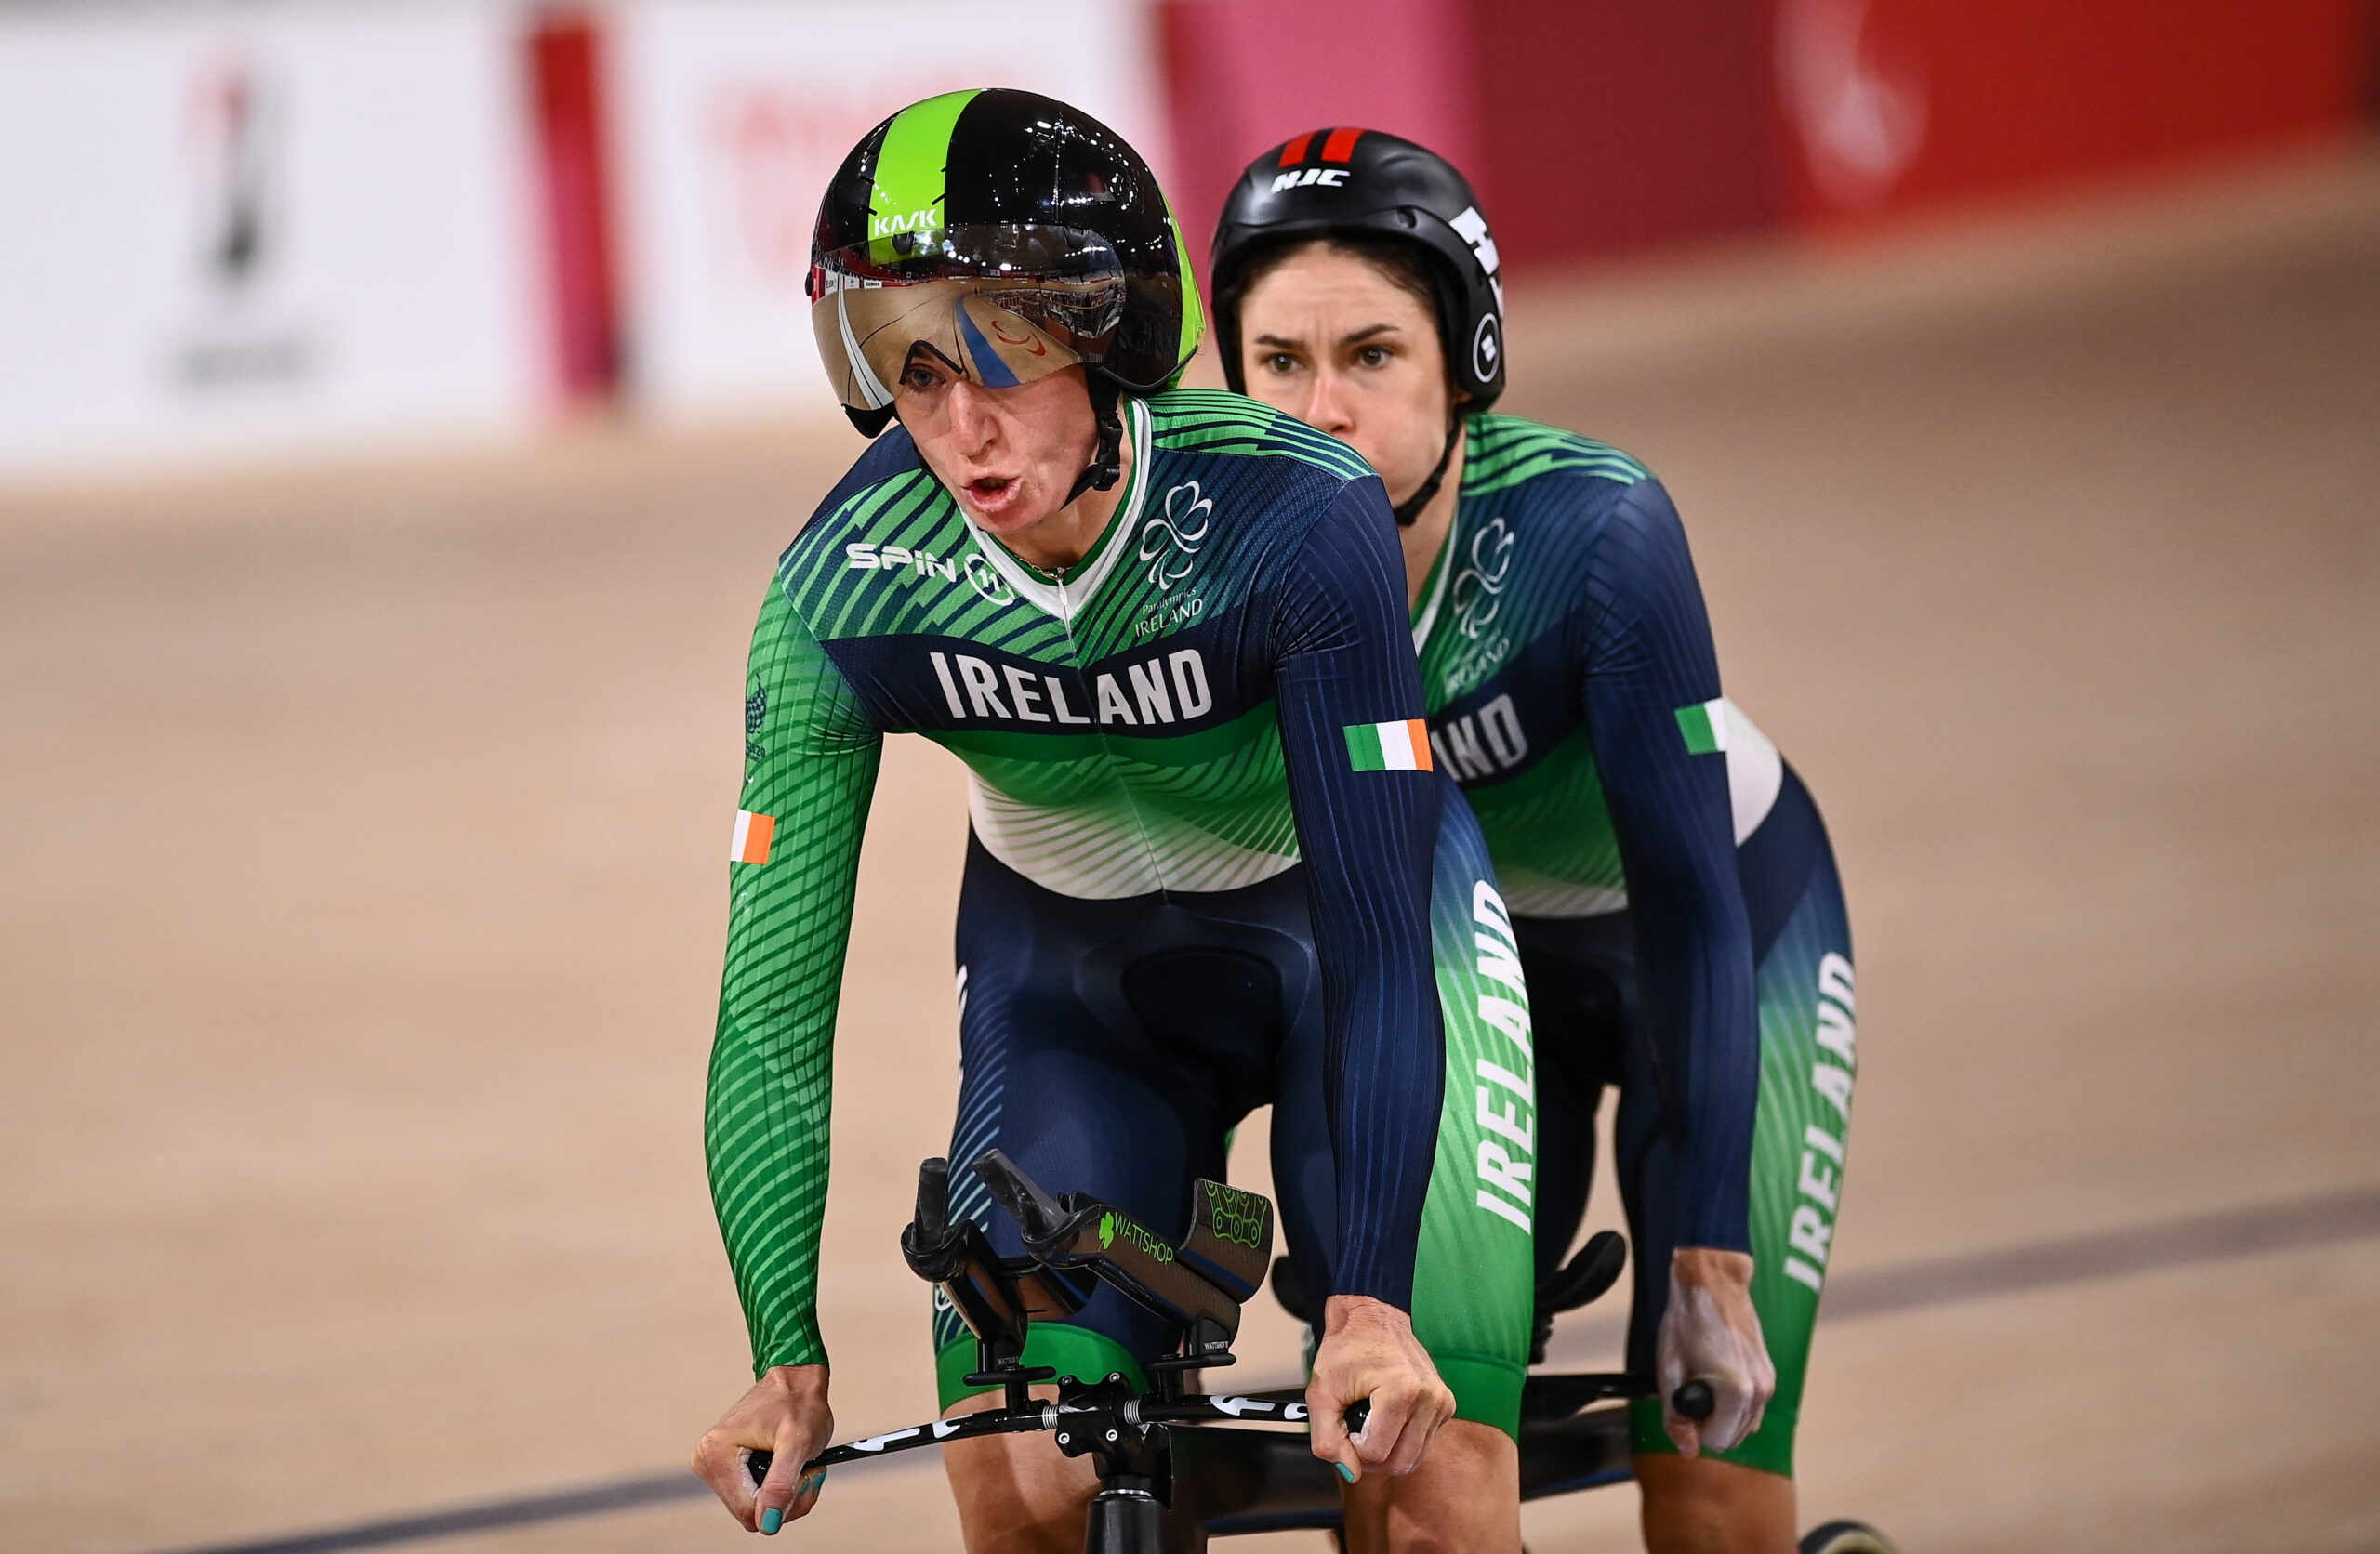 pilot and stoker on a tandem cycling in a velodrome